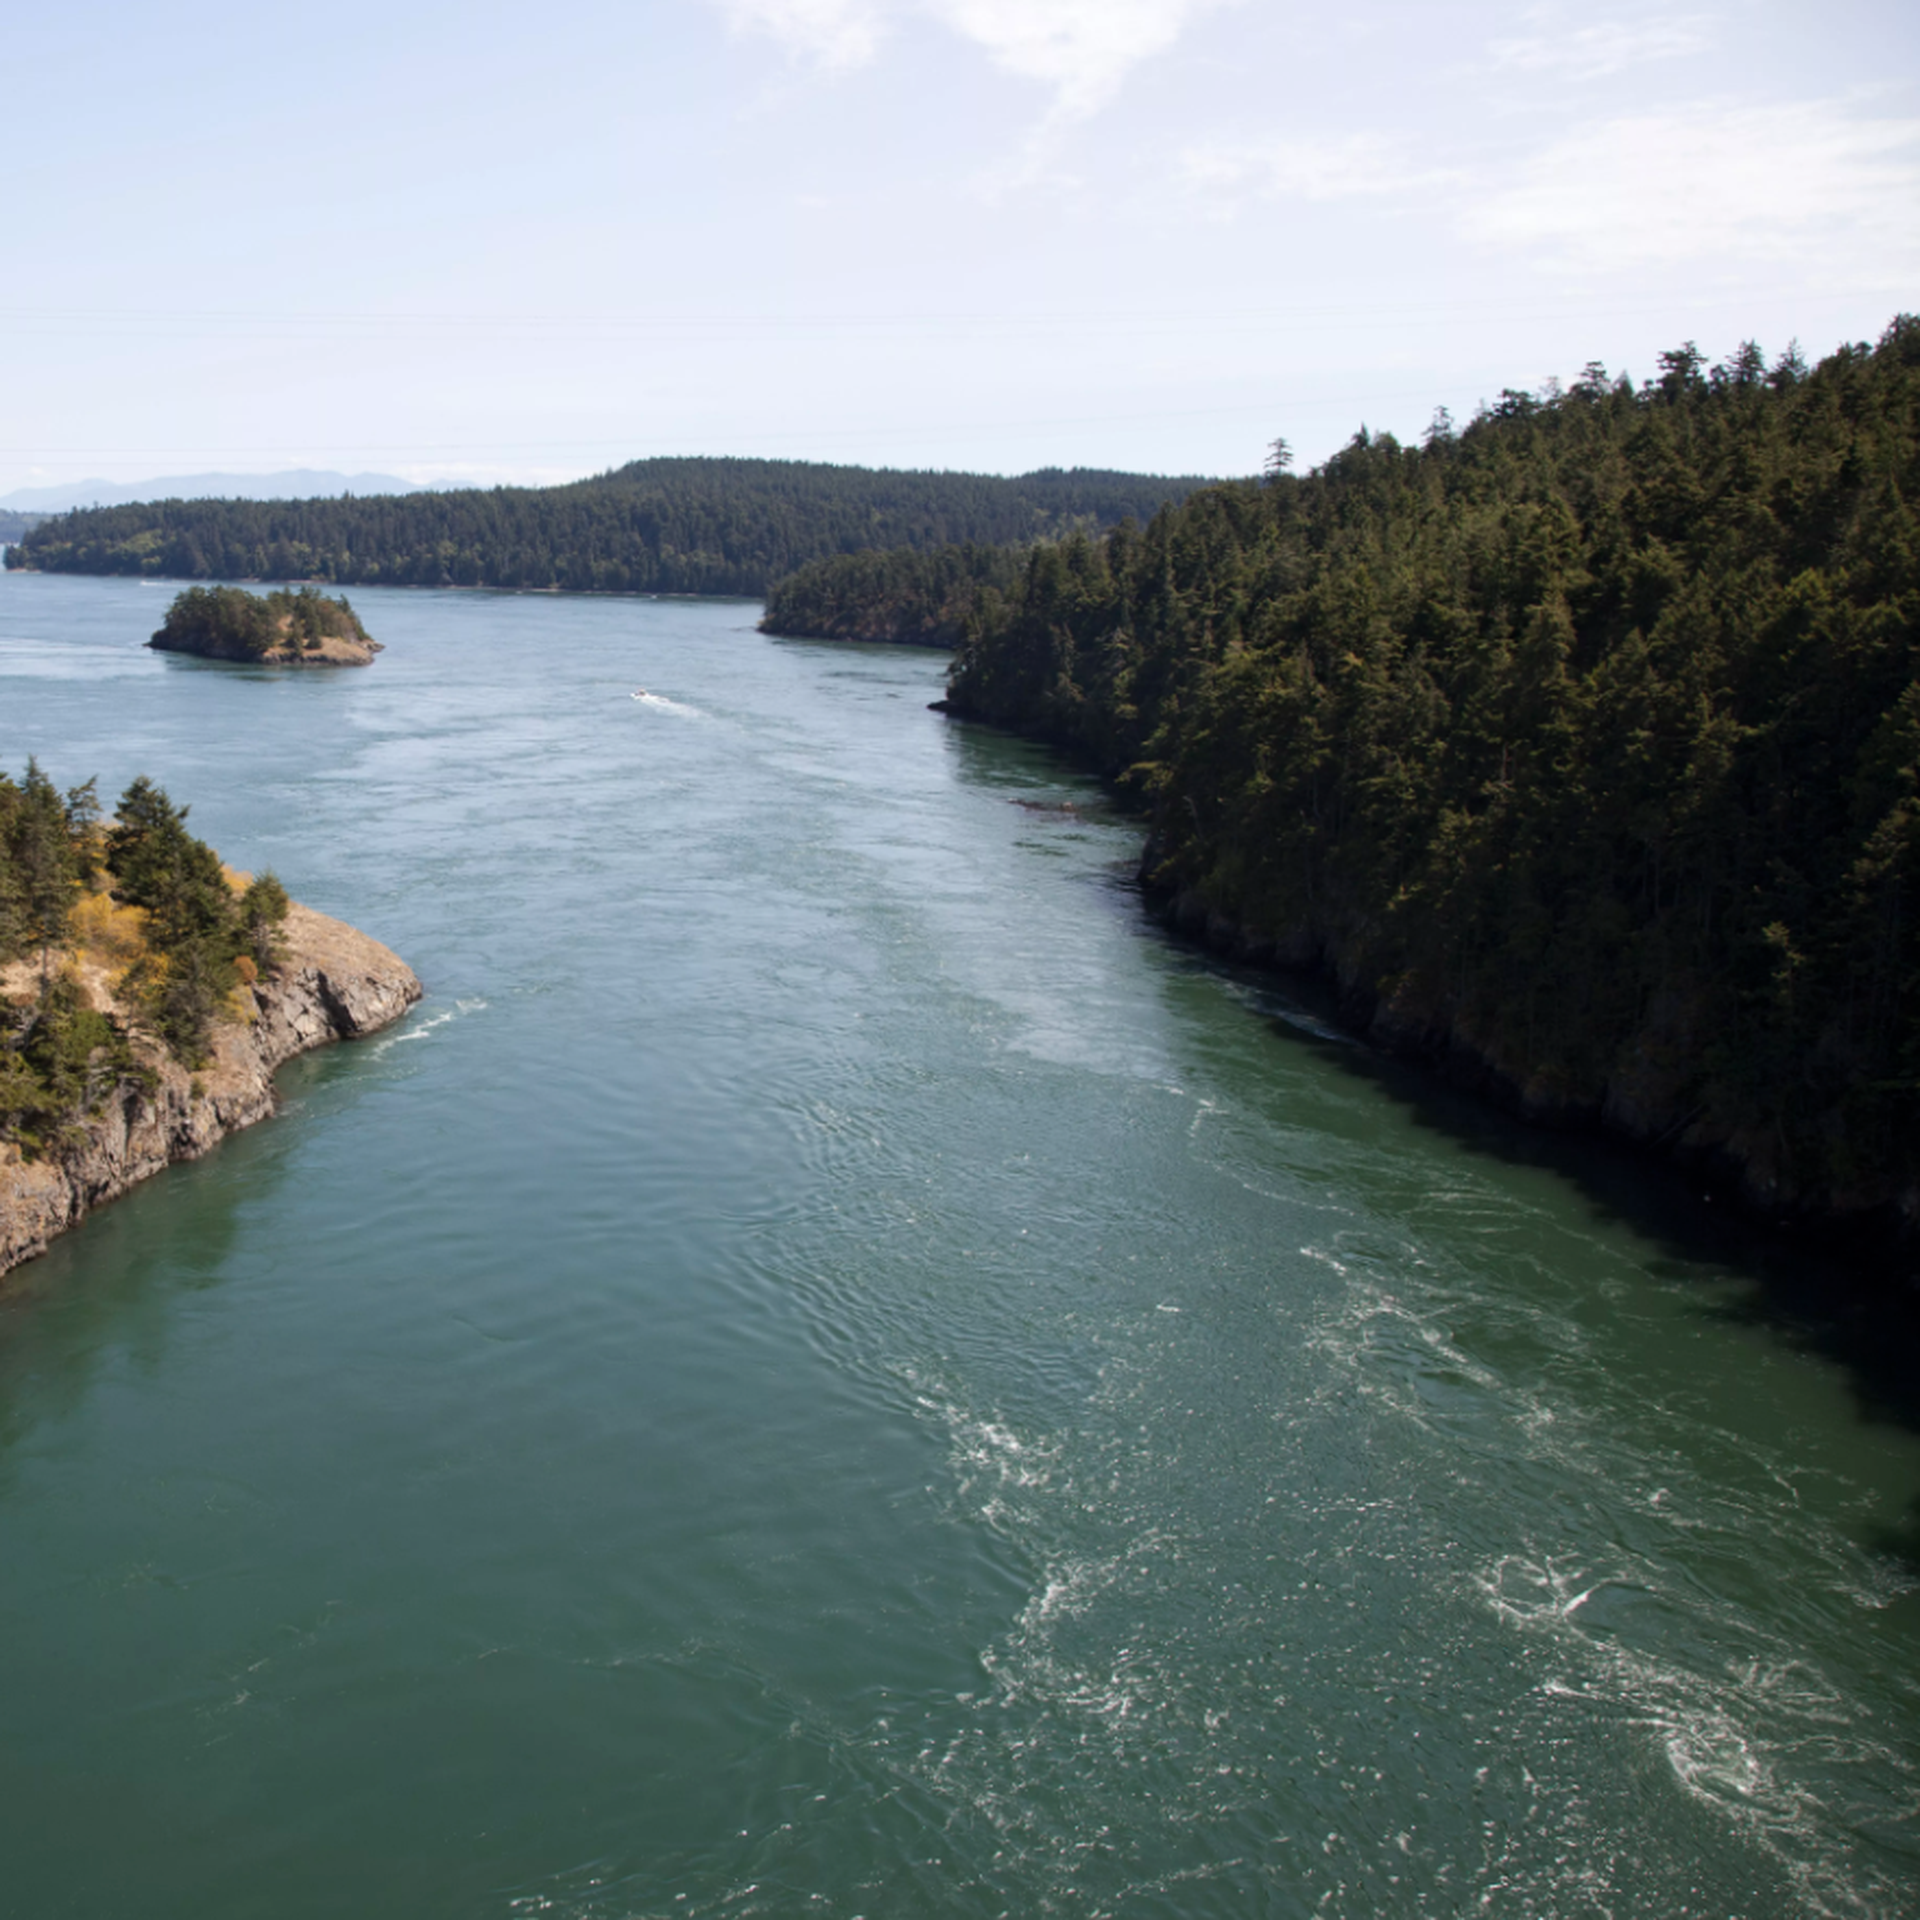 A view of the water below from the bridge in Deception Pass State Park near Seattle.